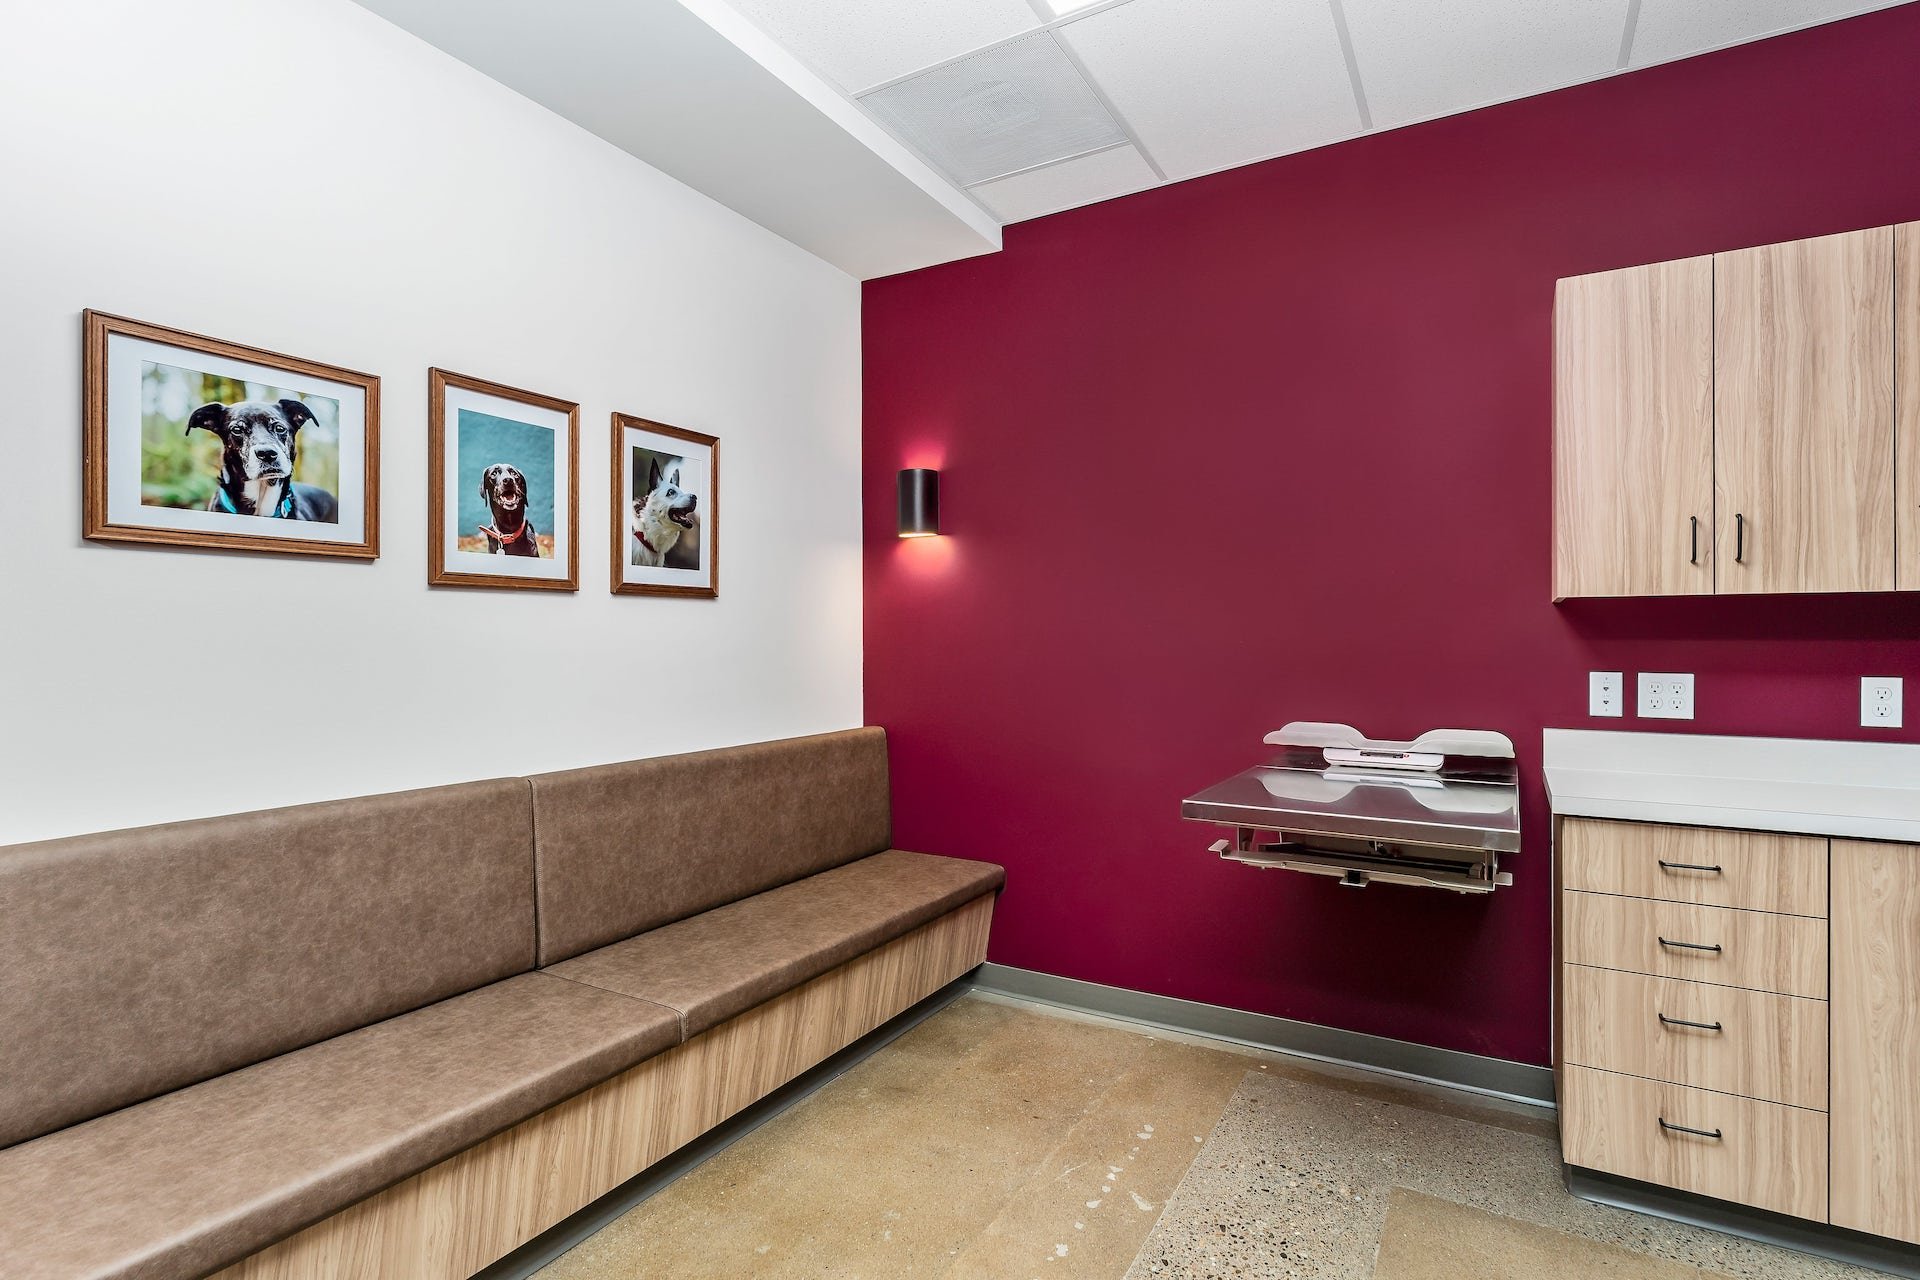 Image of patient room with a bench and shelves